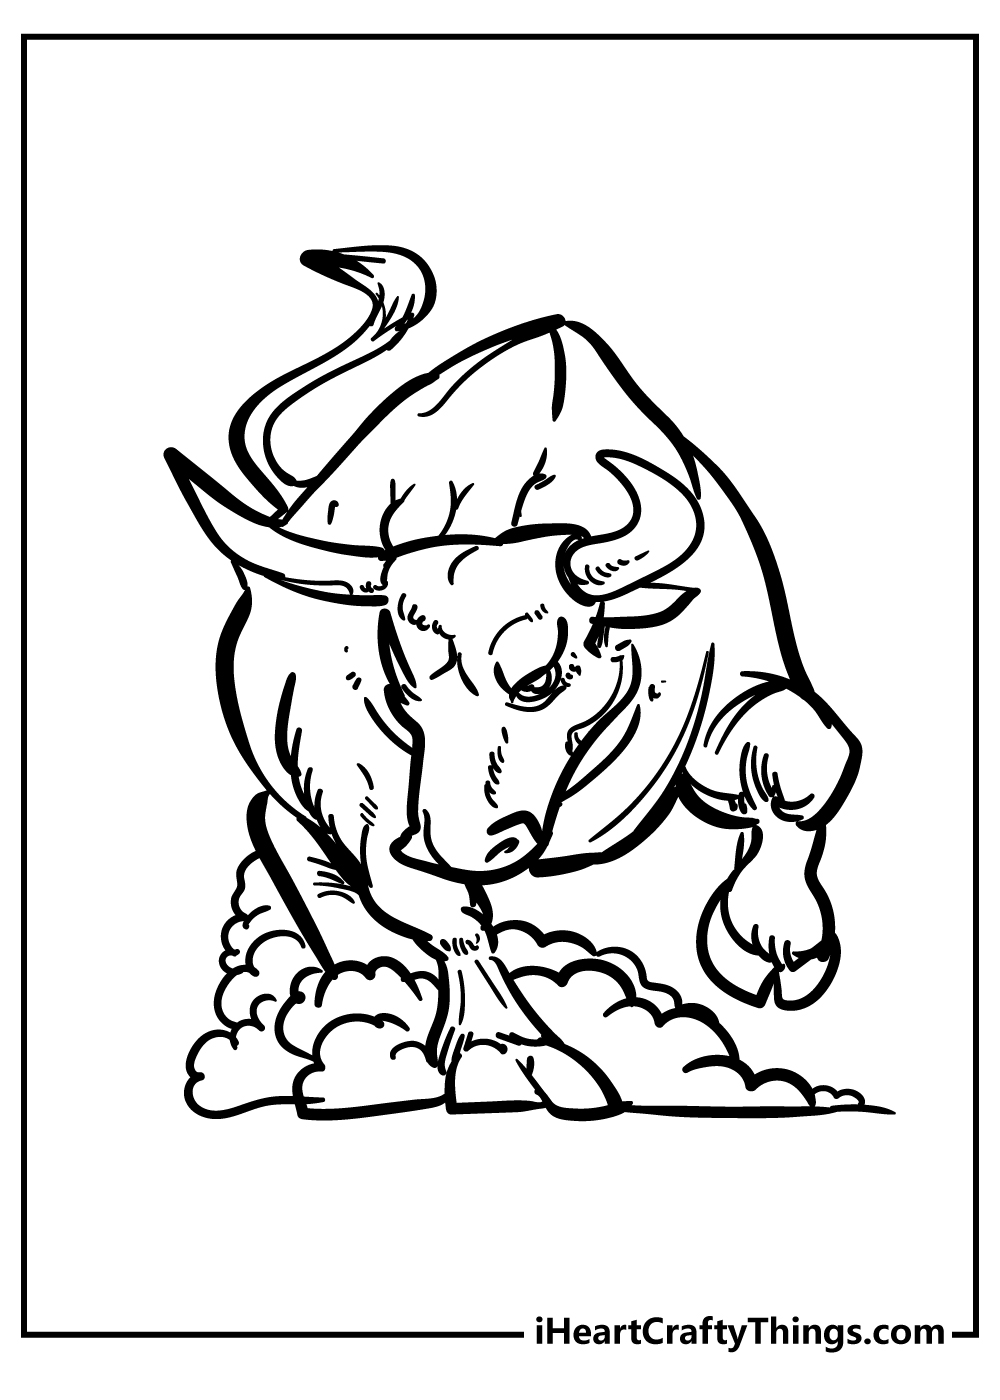 Bull Coloring Pages free pdf download